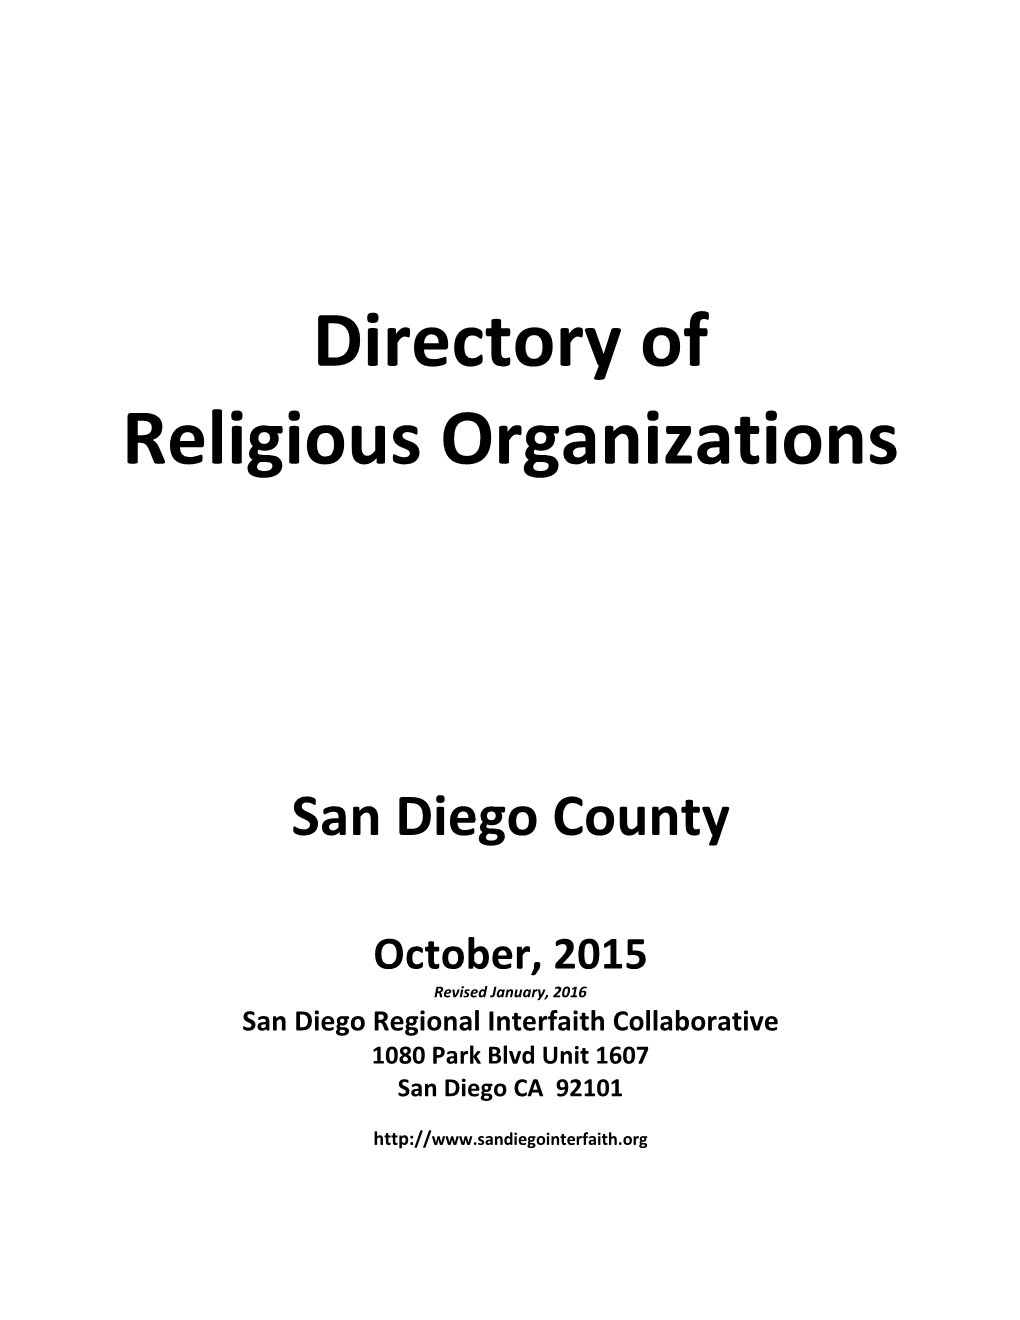 Directory of Religious Organizations